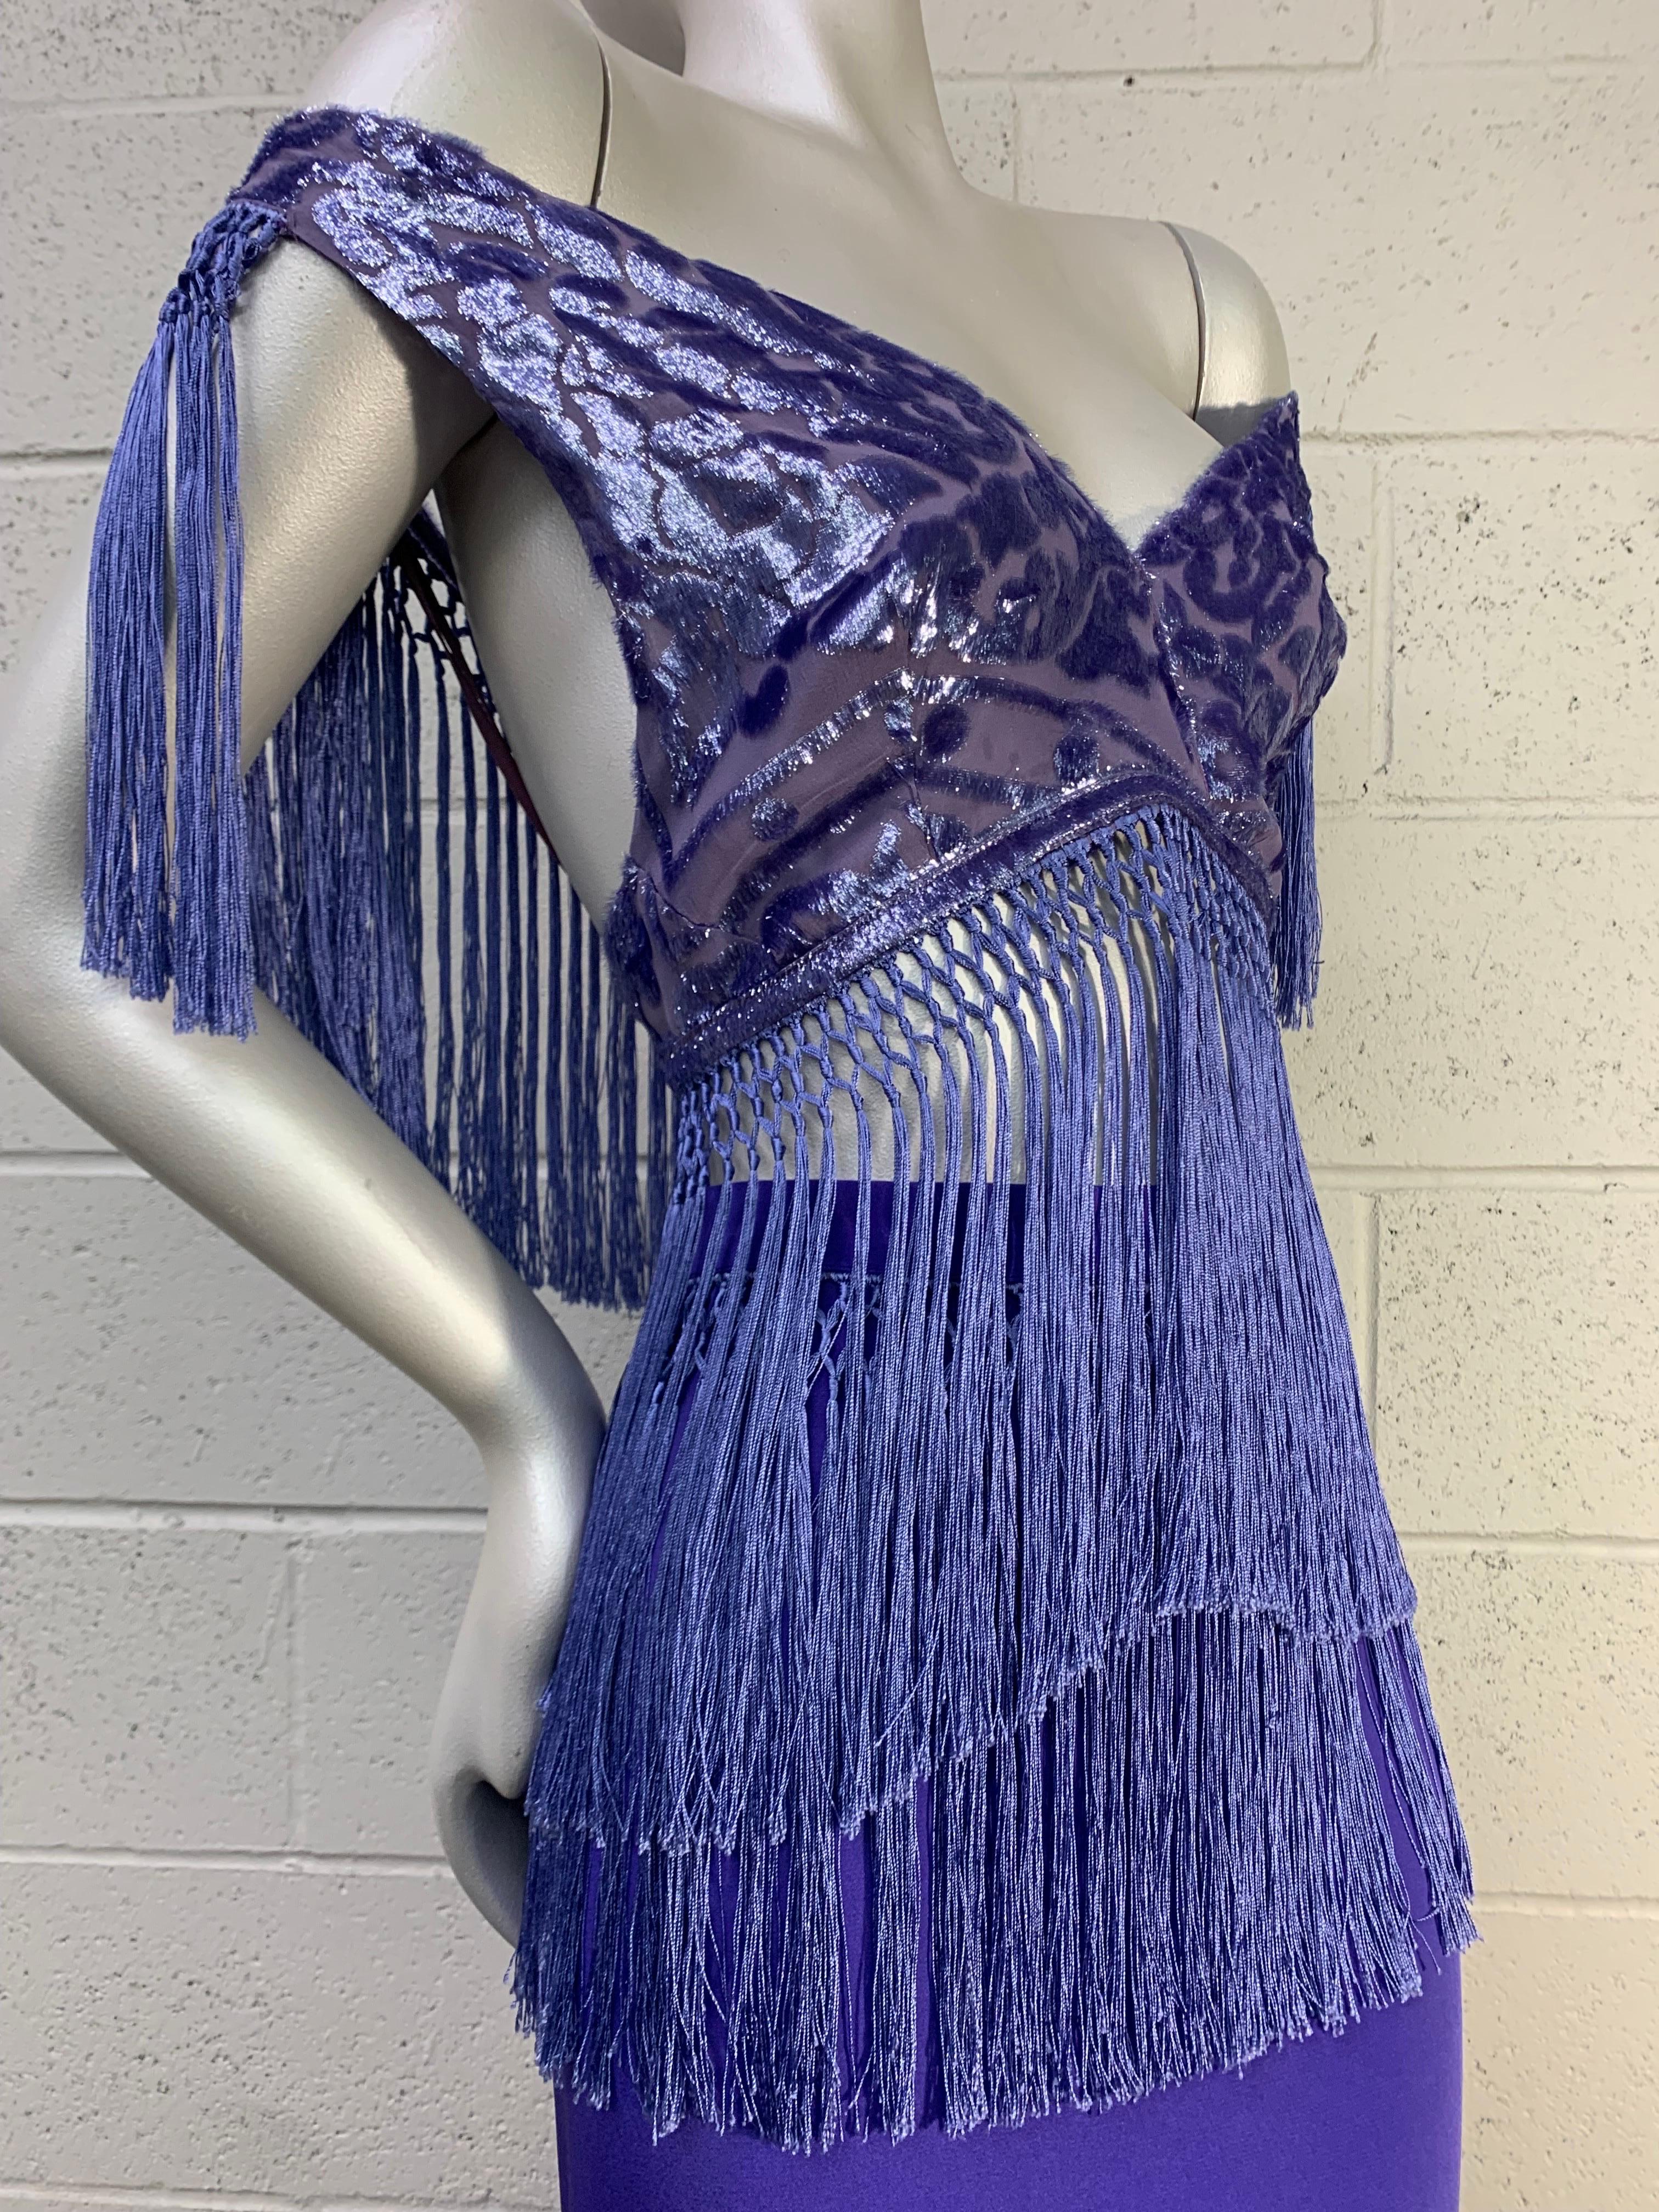 Torso Creations Ultra-Violet 2-Piece Velvet Devore Fringed Skirt & Top Ensemble:  Hi-Low cut hem skirt in silk crepe with a fringed waistband. Top is remastered from a silk velvet fringed shawl in a bra-style with back hook closure and adjustible